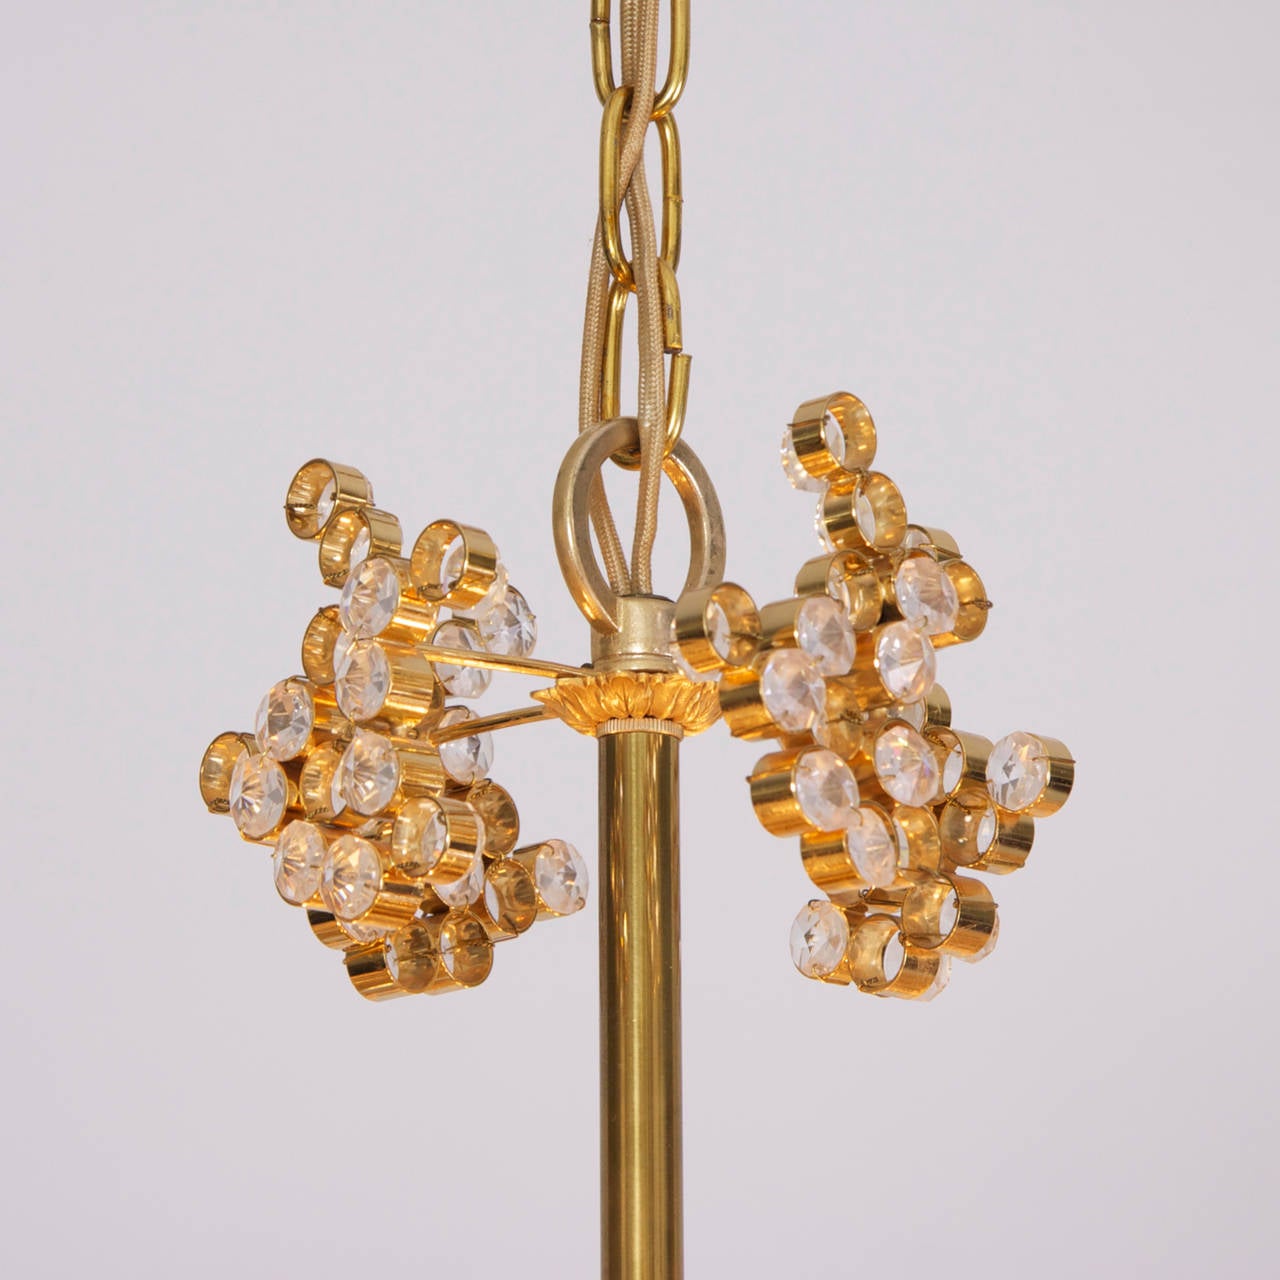 One of two outstanding Palwa chandeliers from the 1960s. The 24-carat gold-plated brass frames are encrusted with hundreds of high quality diamond like crystals. The chandeliers are handmade and in excellent condition and float every room in a